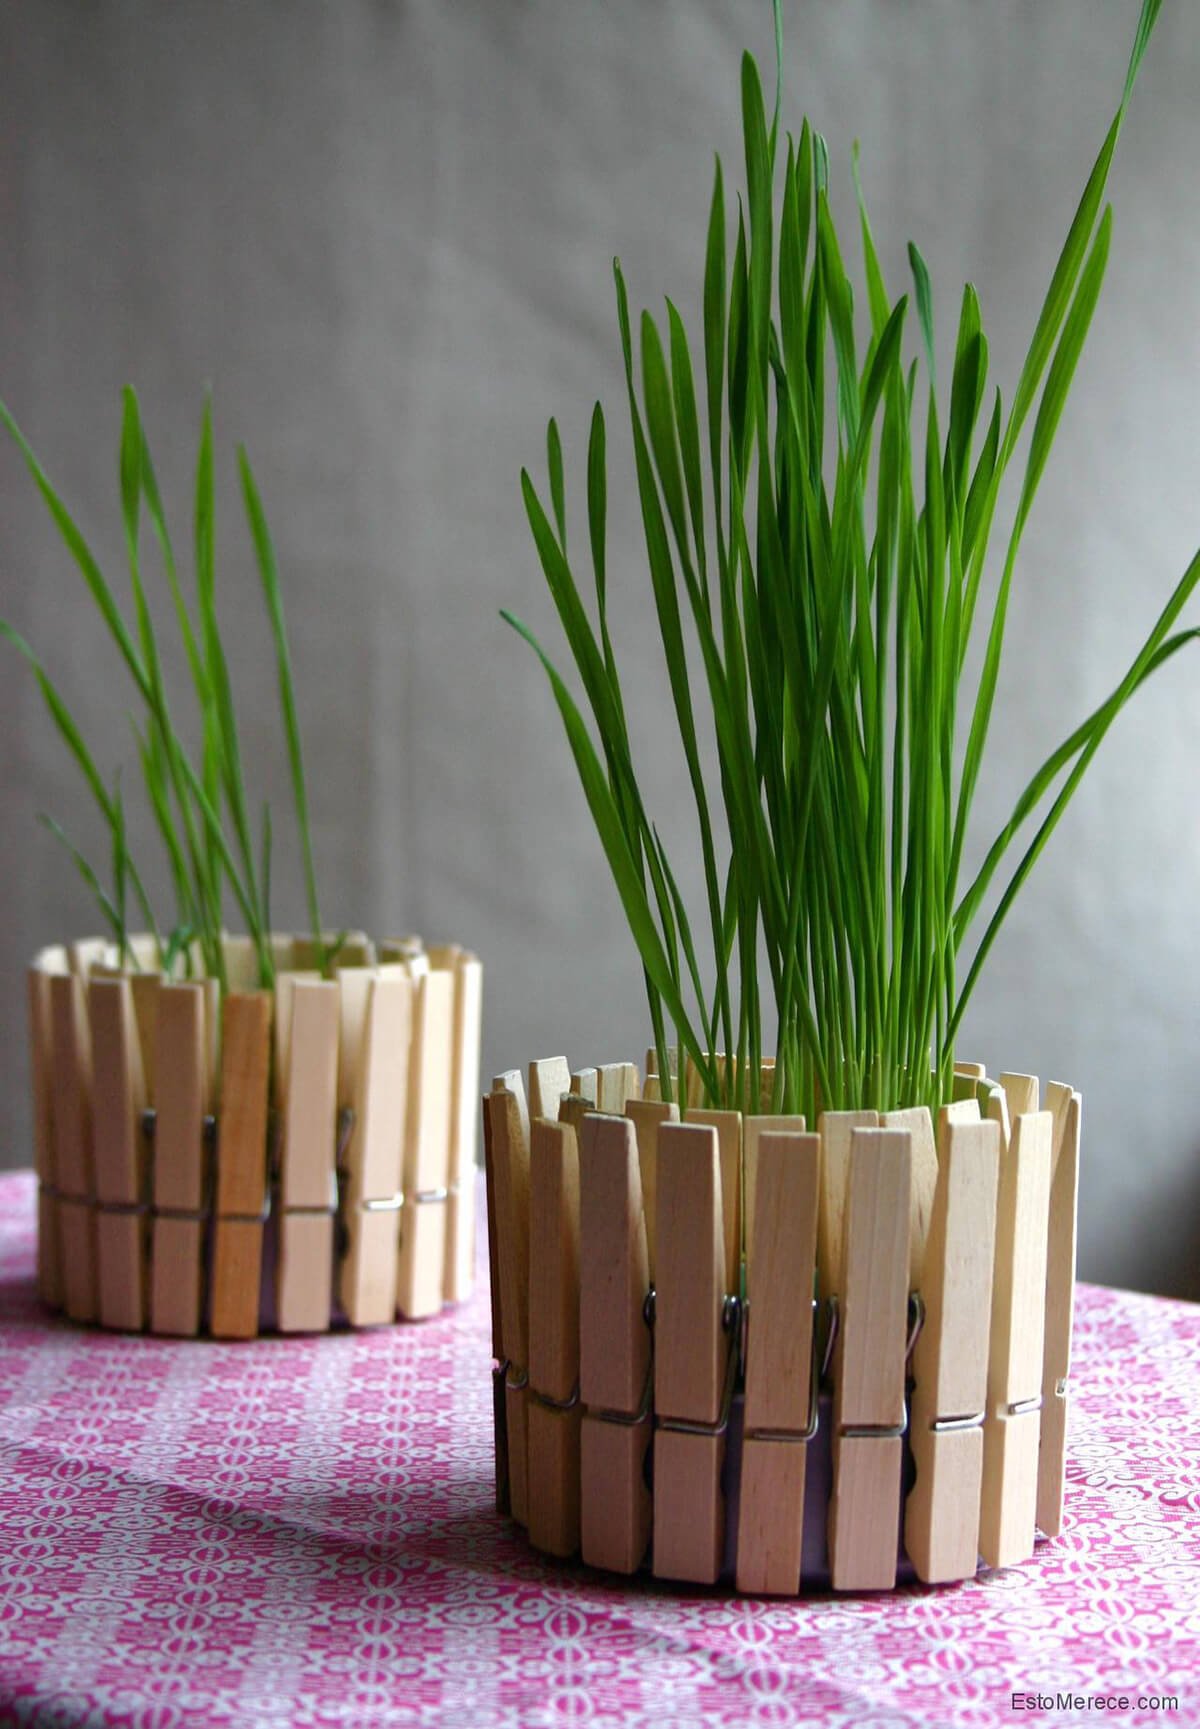 Decorative Grass with Clothespin Fence